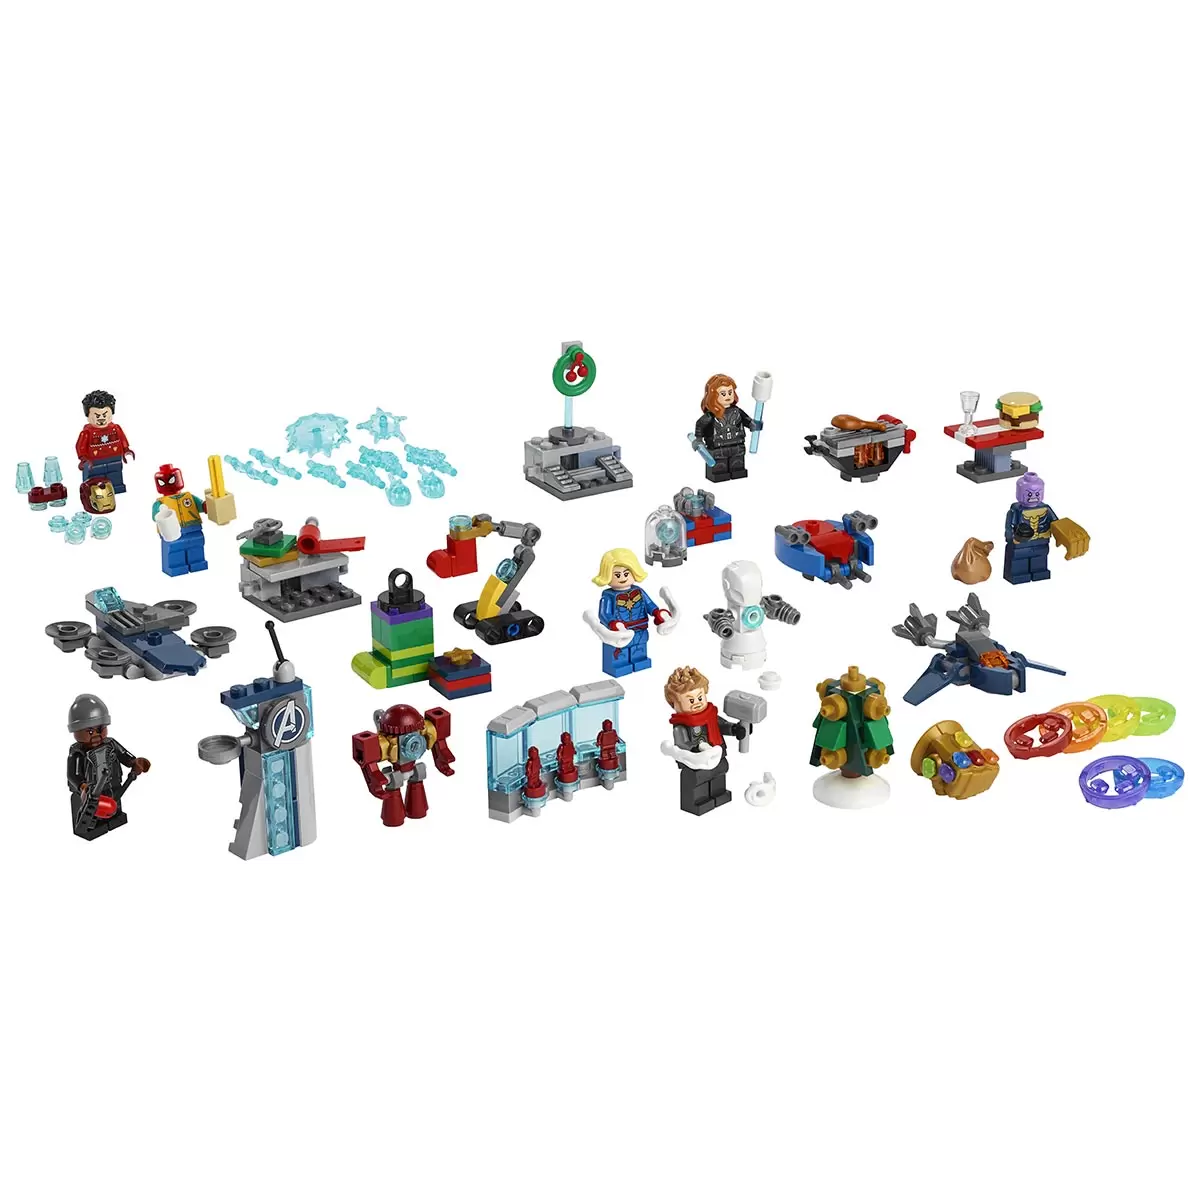 Buy LEGO The Avengers Advent Calendar Items Image at Costco.co.uk